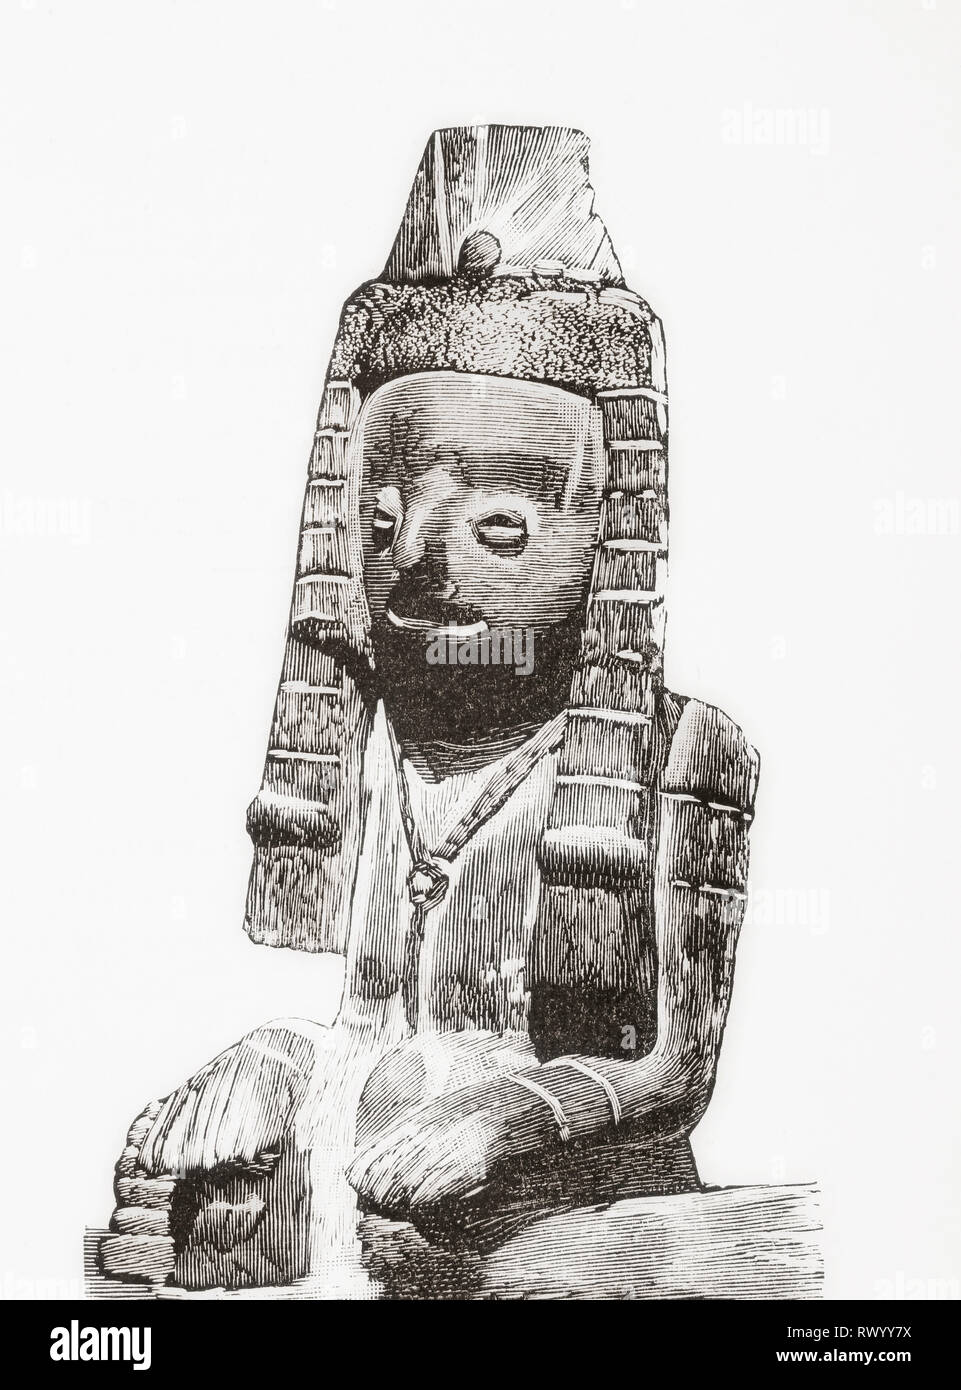 Ceramic figure with an Egyptian aspect from Chibcha, Cundimarca, Bogota, South America.  From La Ilustracion Artistica, published 1887. Stock Photo